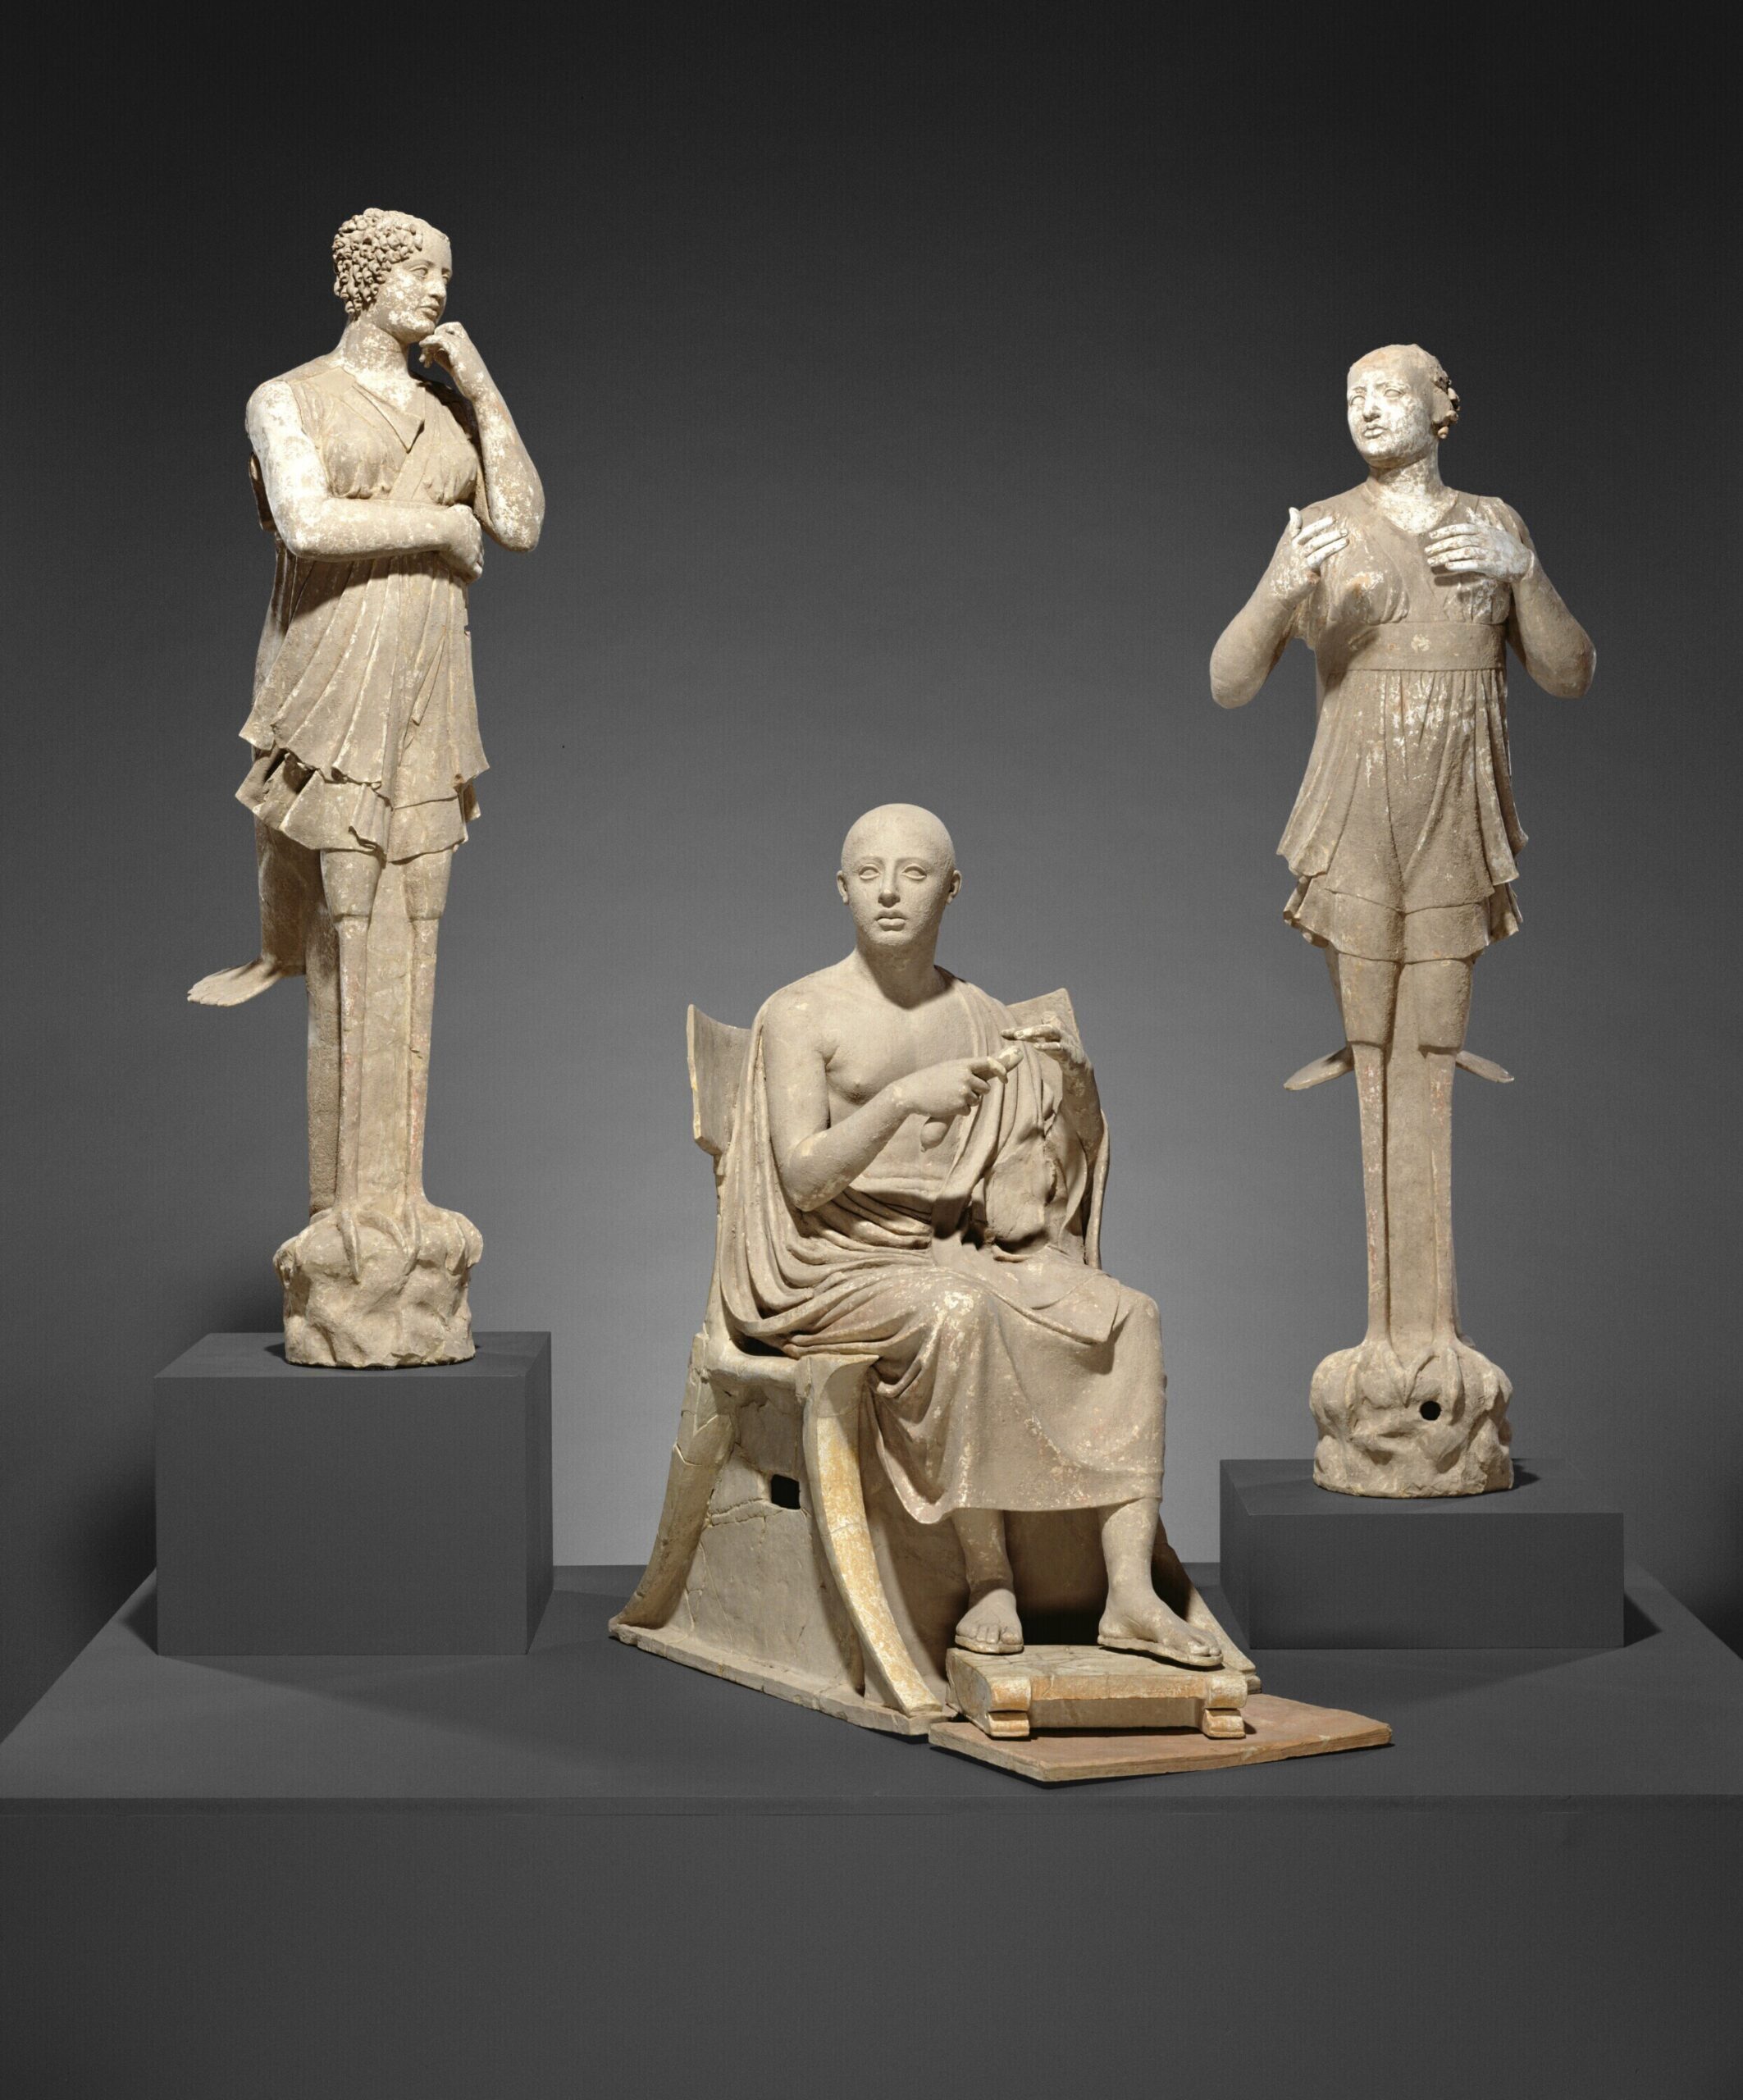 This undated photo provided by The J. Paul Getty Museum shows Sculptural Group of a Seated Poet and Sirens. The J. Paul Getty Museum in Los Angeles is returning ancient sculptures and other works of art that were illegally exported from Italy. The museum announced Thursday, Aug. 11, 2022, that next month it will ship back the nearly life-size group of statues known as "Orpheus and the Sirens." (The J. Paul Getty Museum via AP)